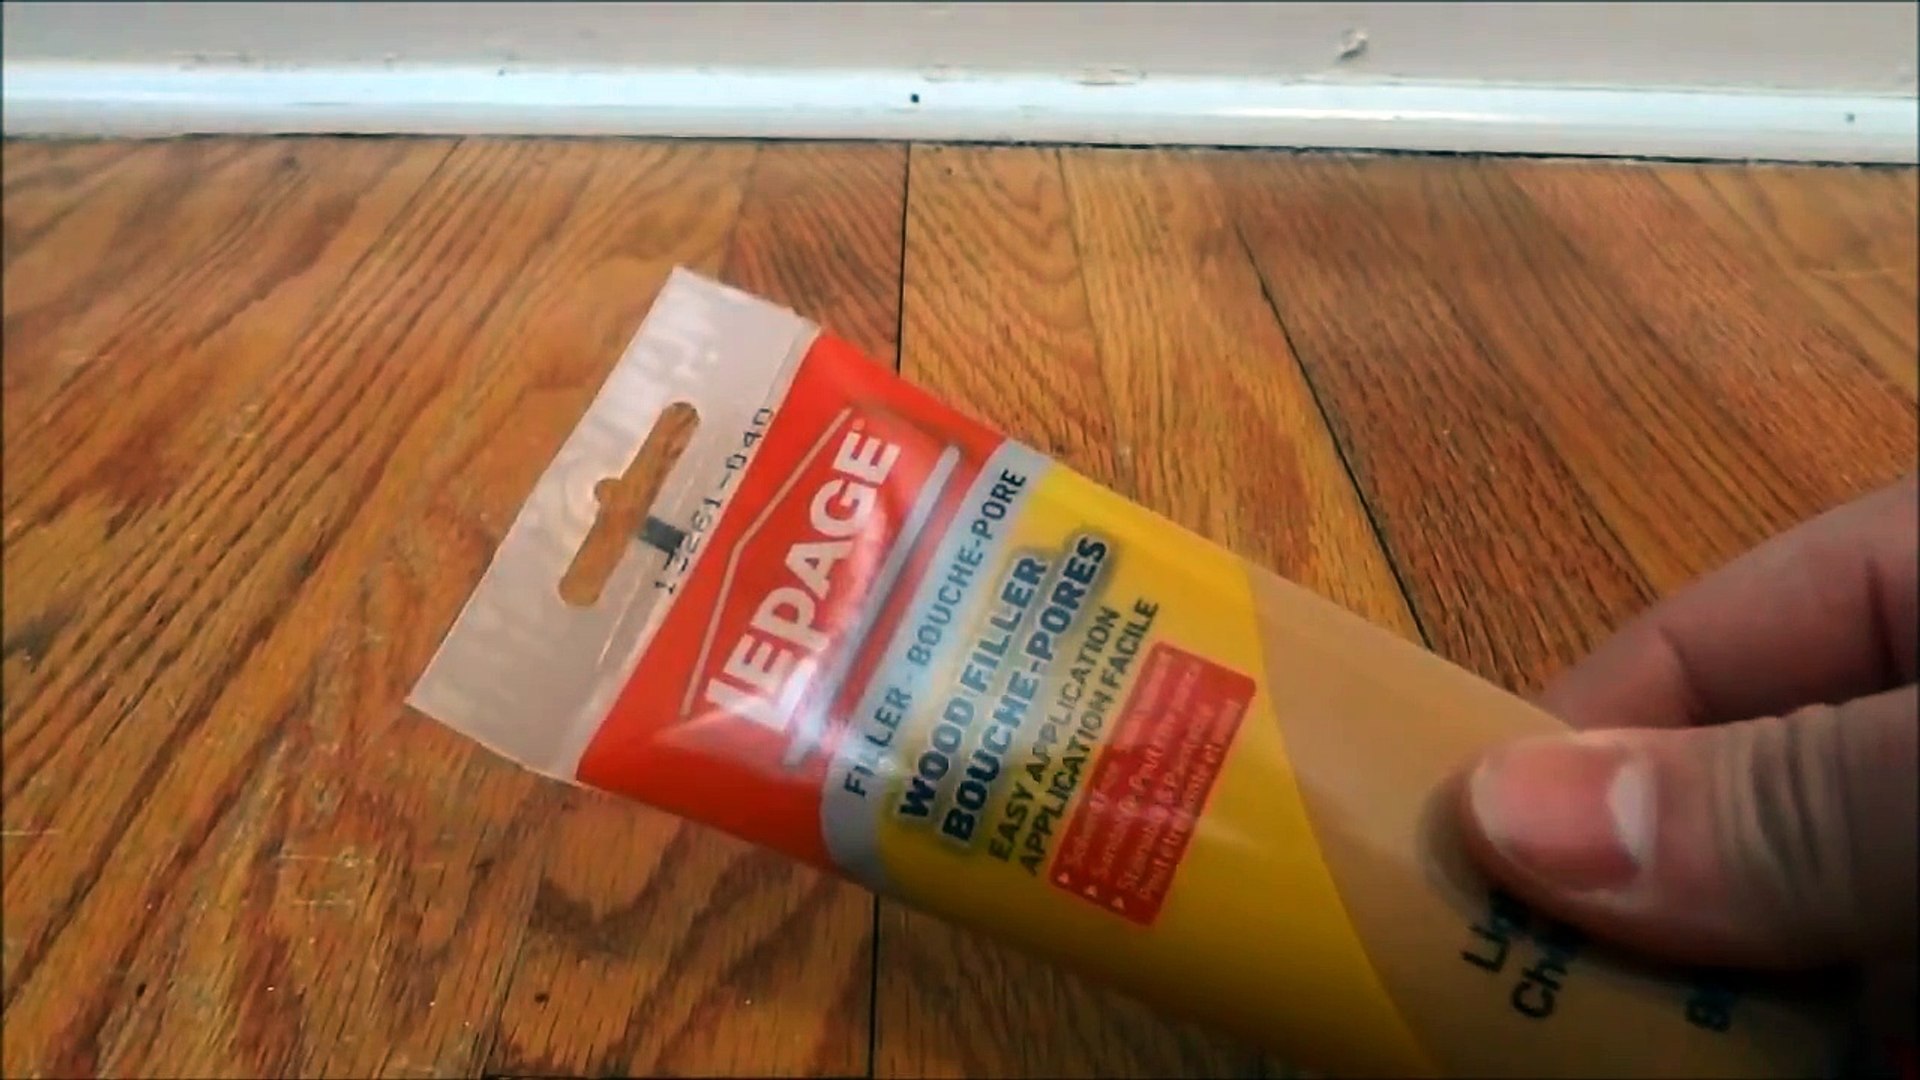 How To Fill In Gaps Between Hardwood Flooring With Wood Filler